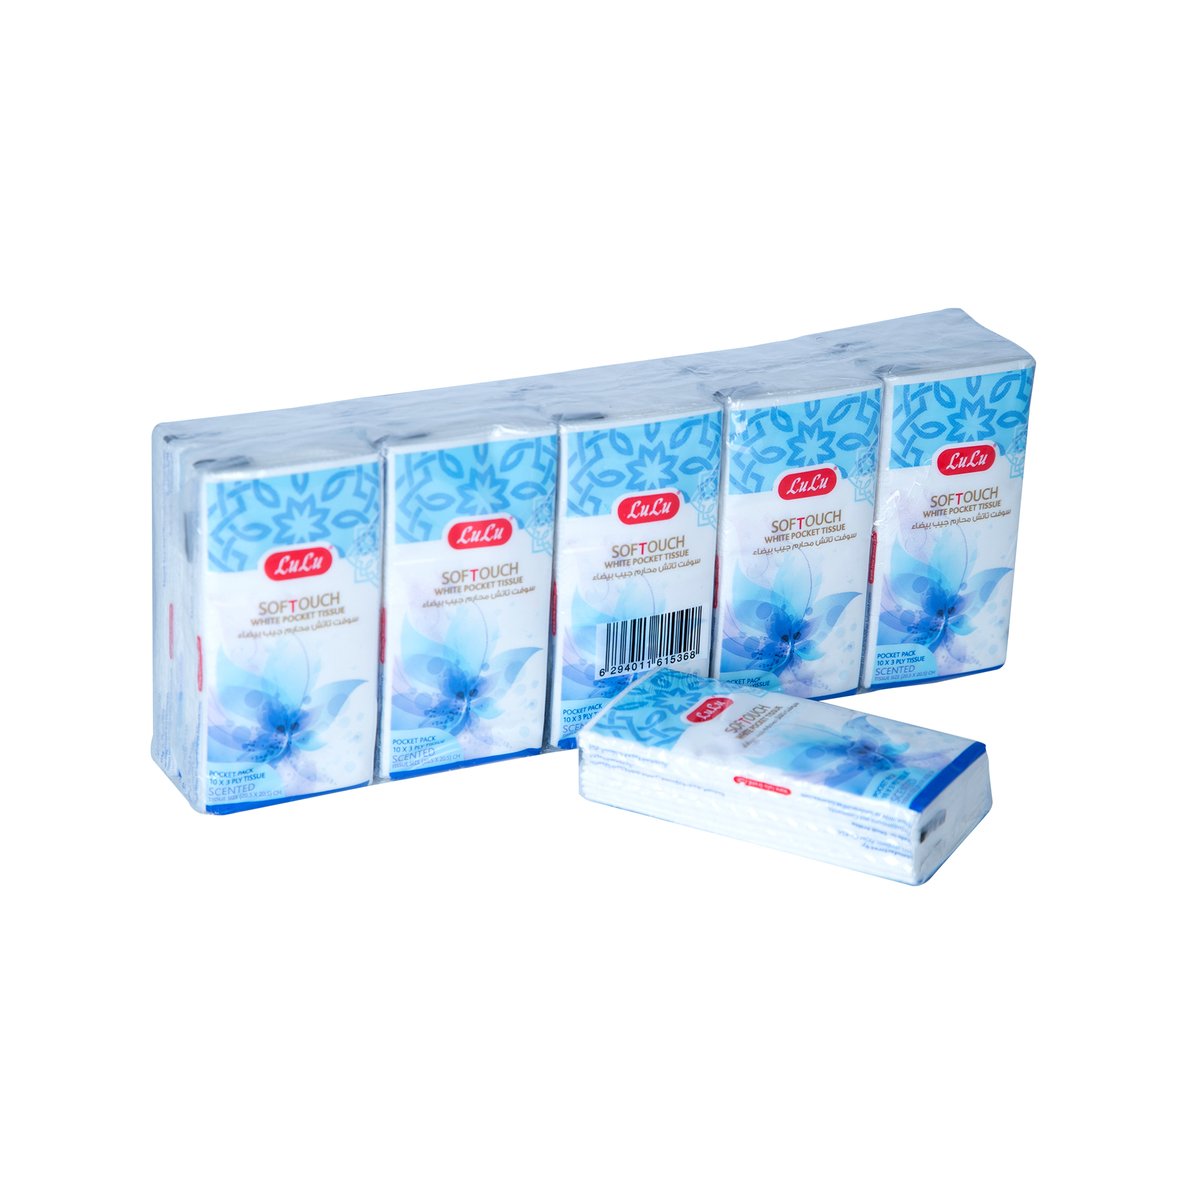 LuLu Softouch Facial Pocket Tissue 3ply 10 Sheets